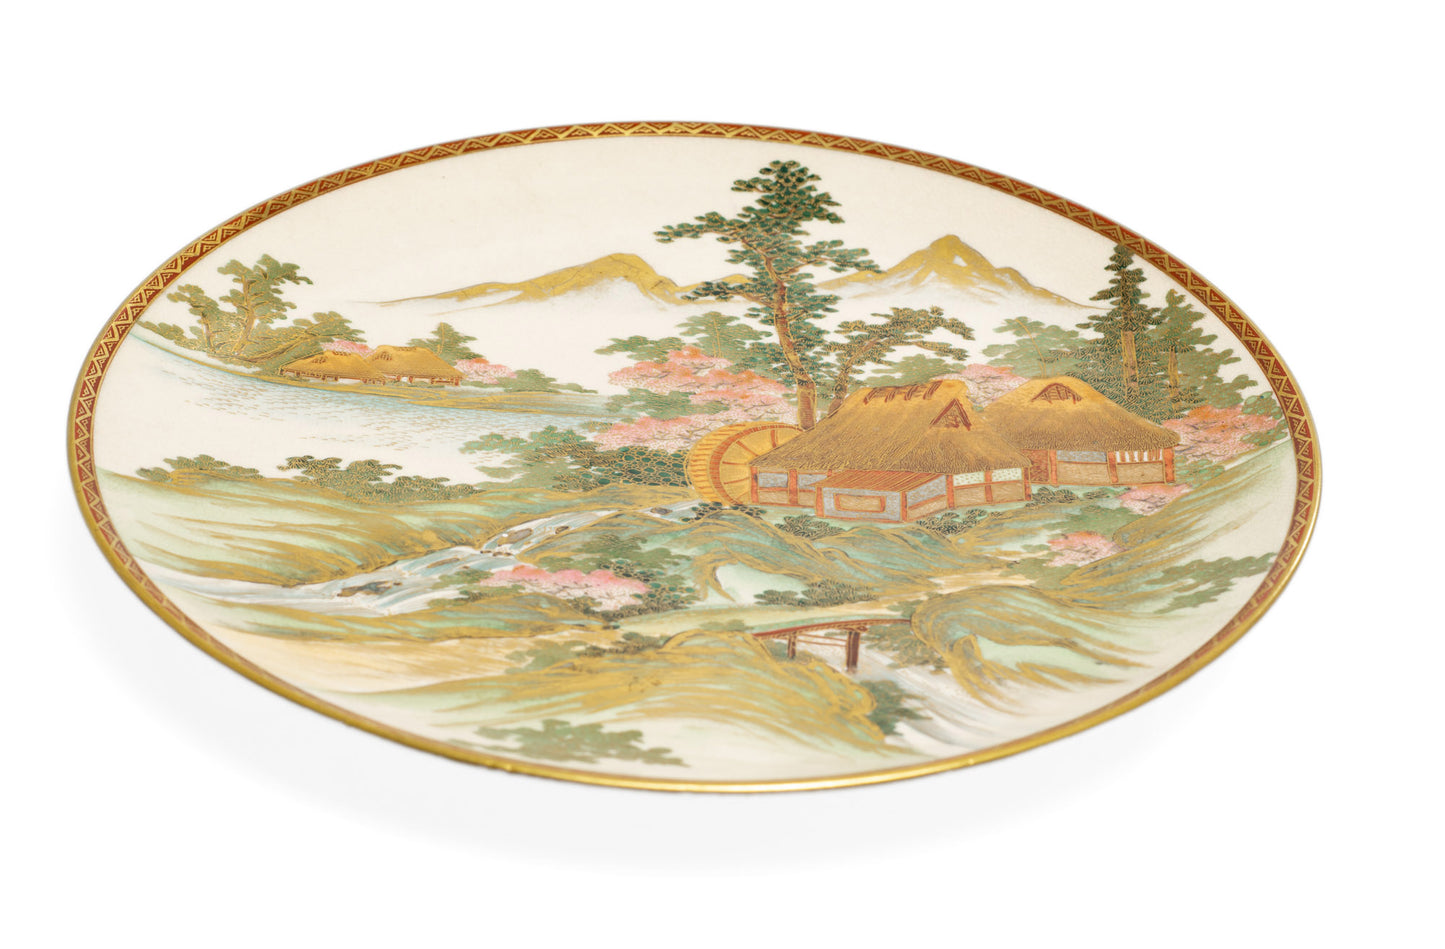 Japanese Satsuma Ware Pottery Plate with Watermill & Mountains by Yuzan - Meiji (Code 2646)